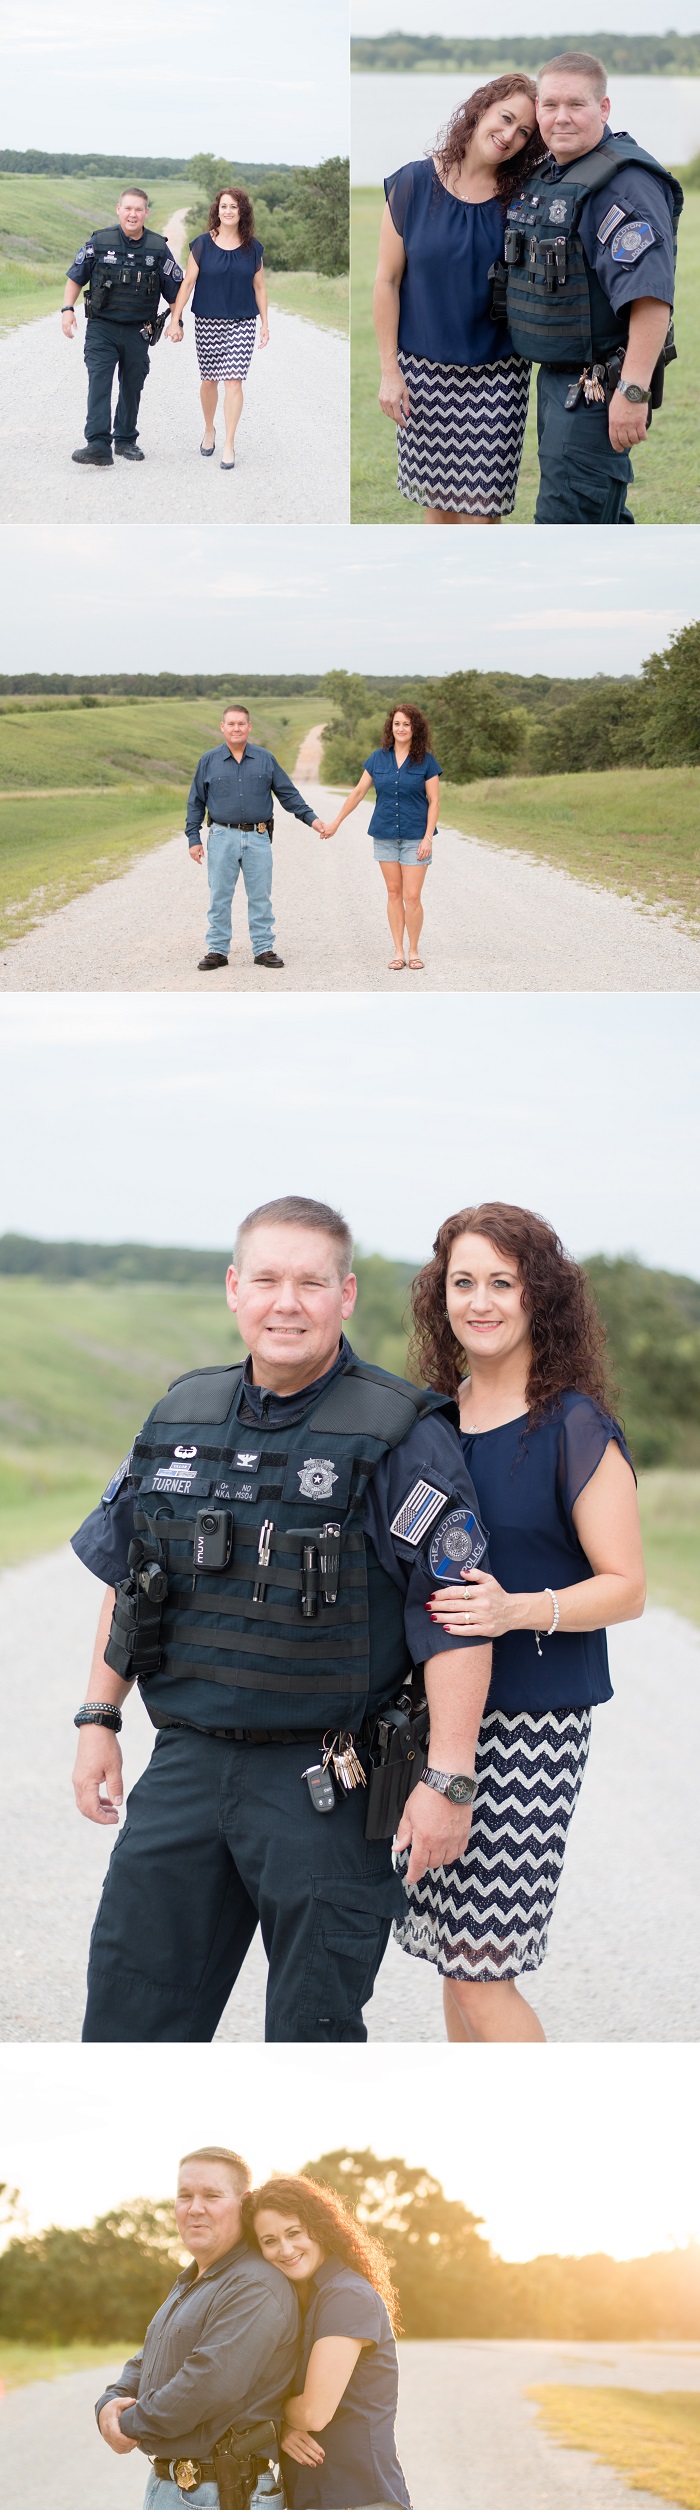 Police Couples Photography